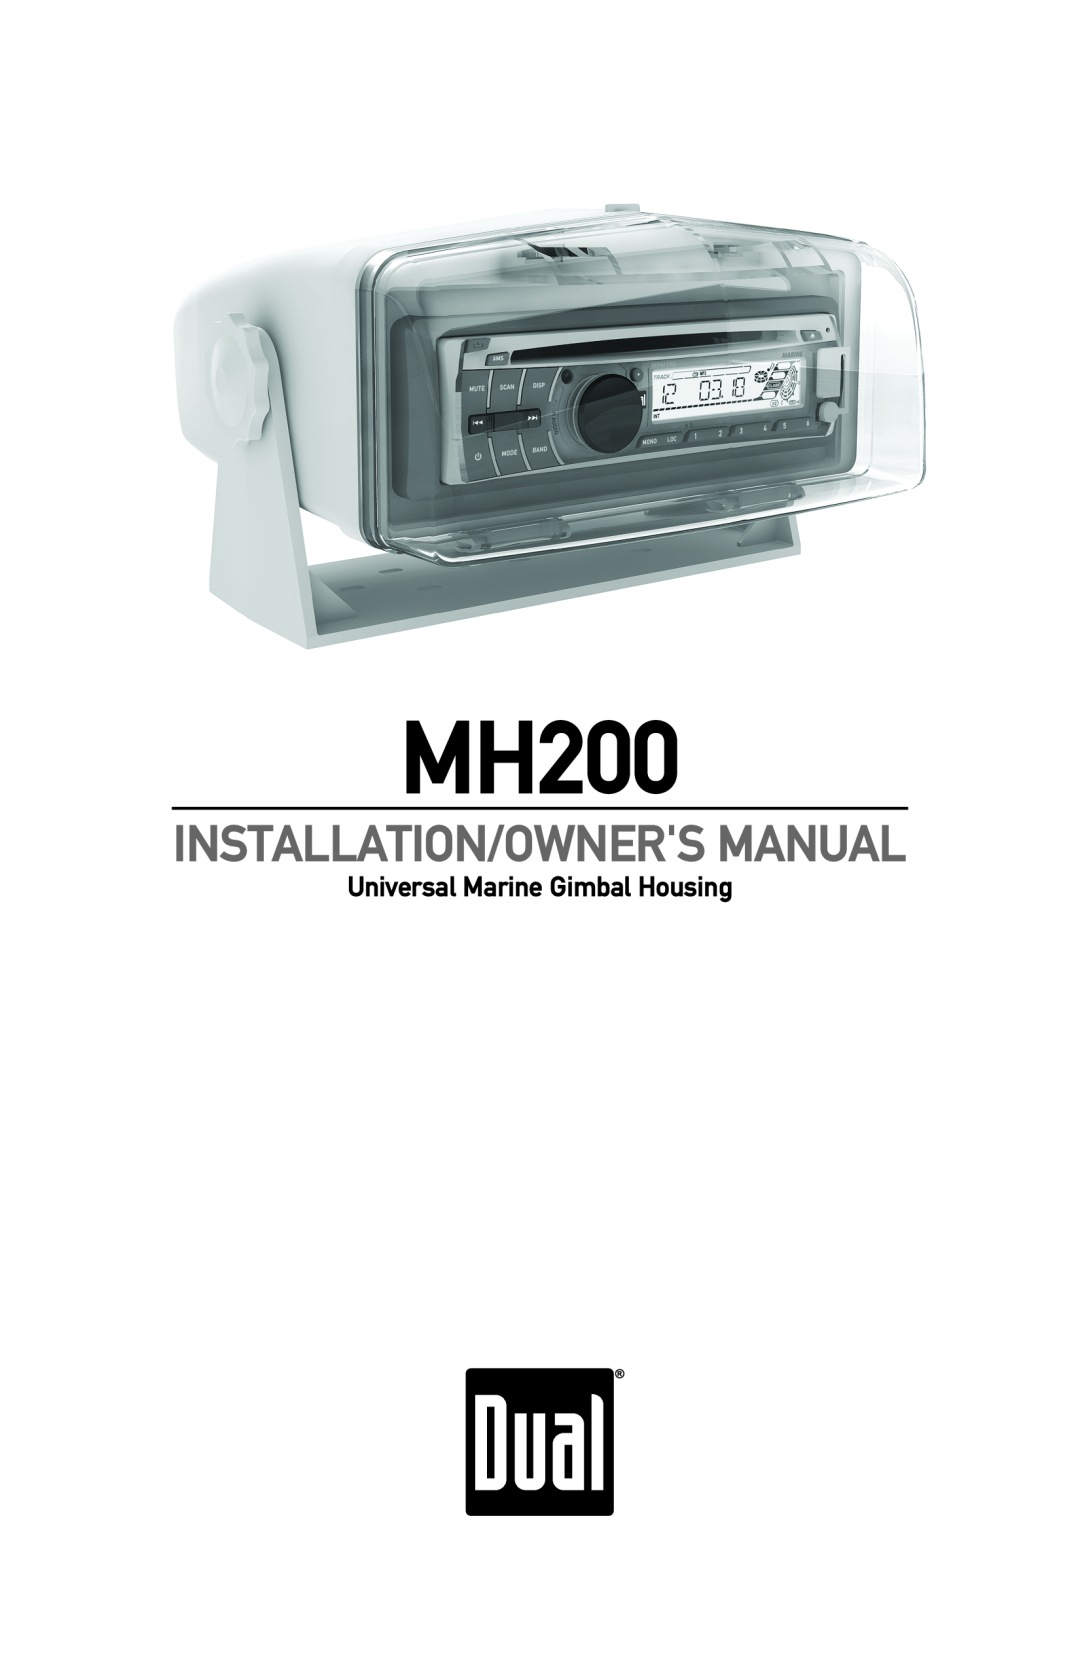 Dual MH200 owner manual Universal Marine Gimbal Housing, Installation/Owners Manual 